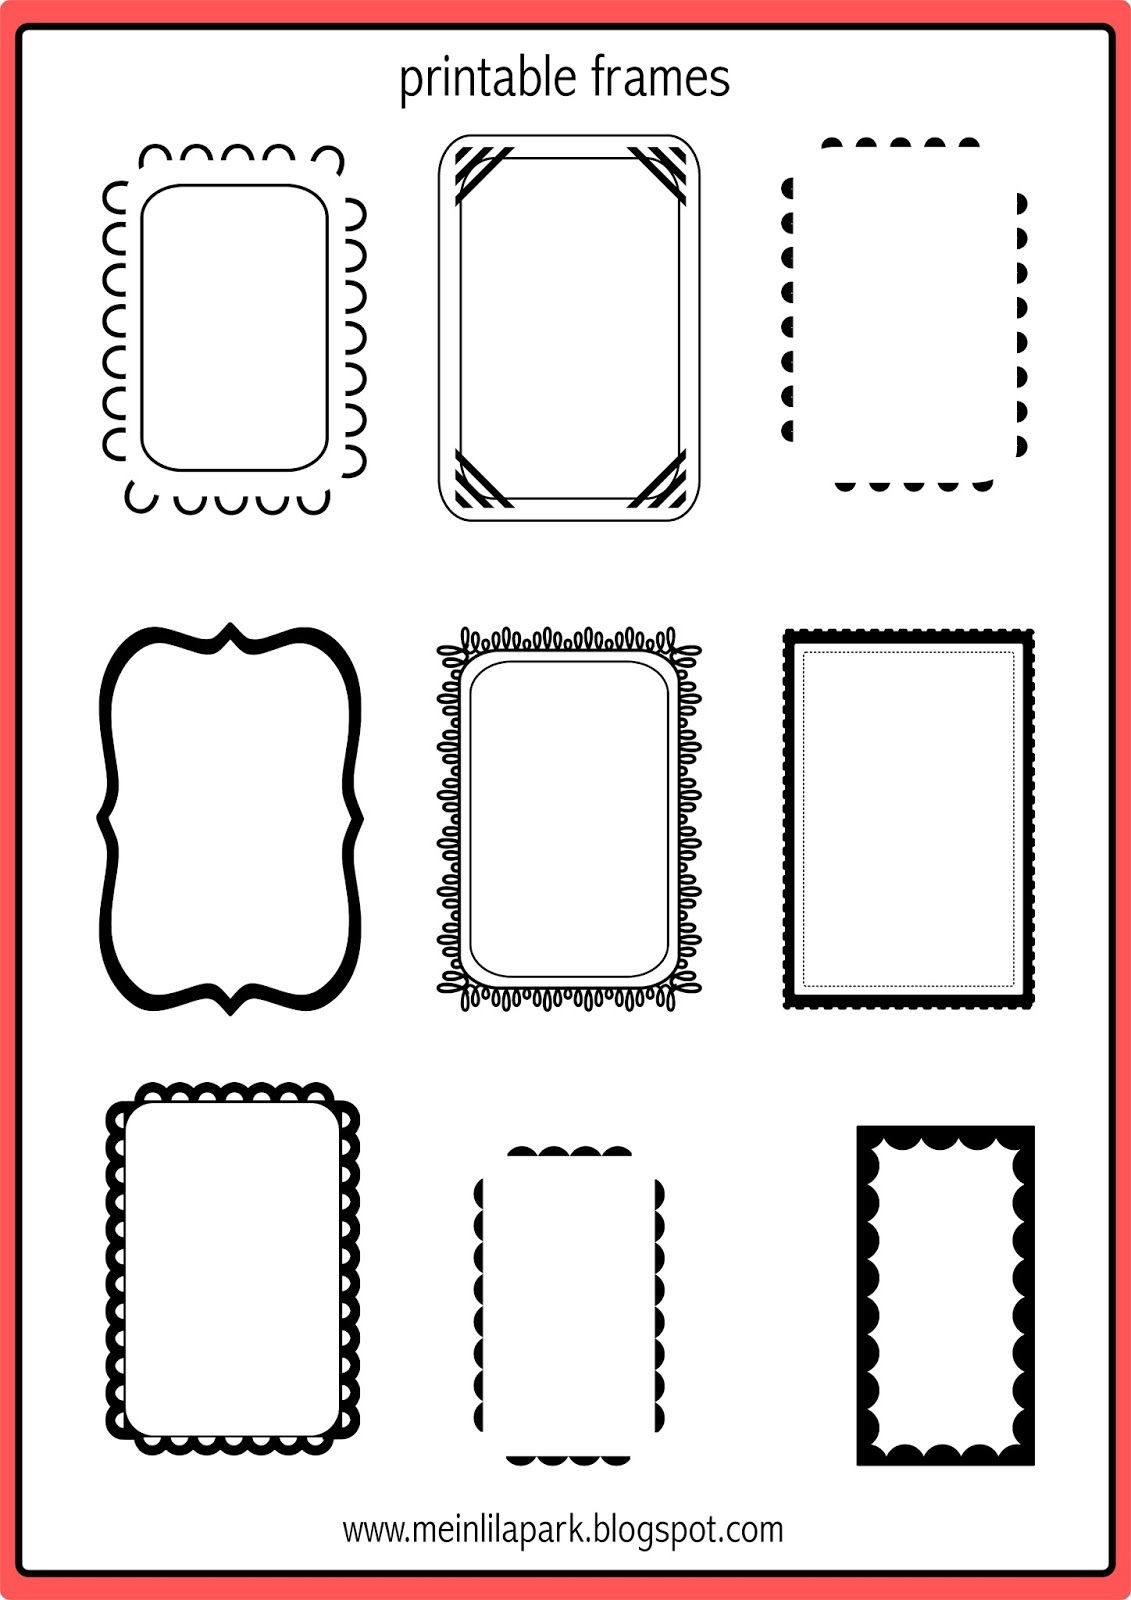 Pin On Free Printables ✄ And More pertaining to Free Printable Frames for Scrapbooking